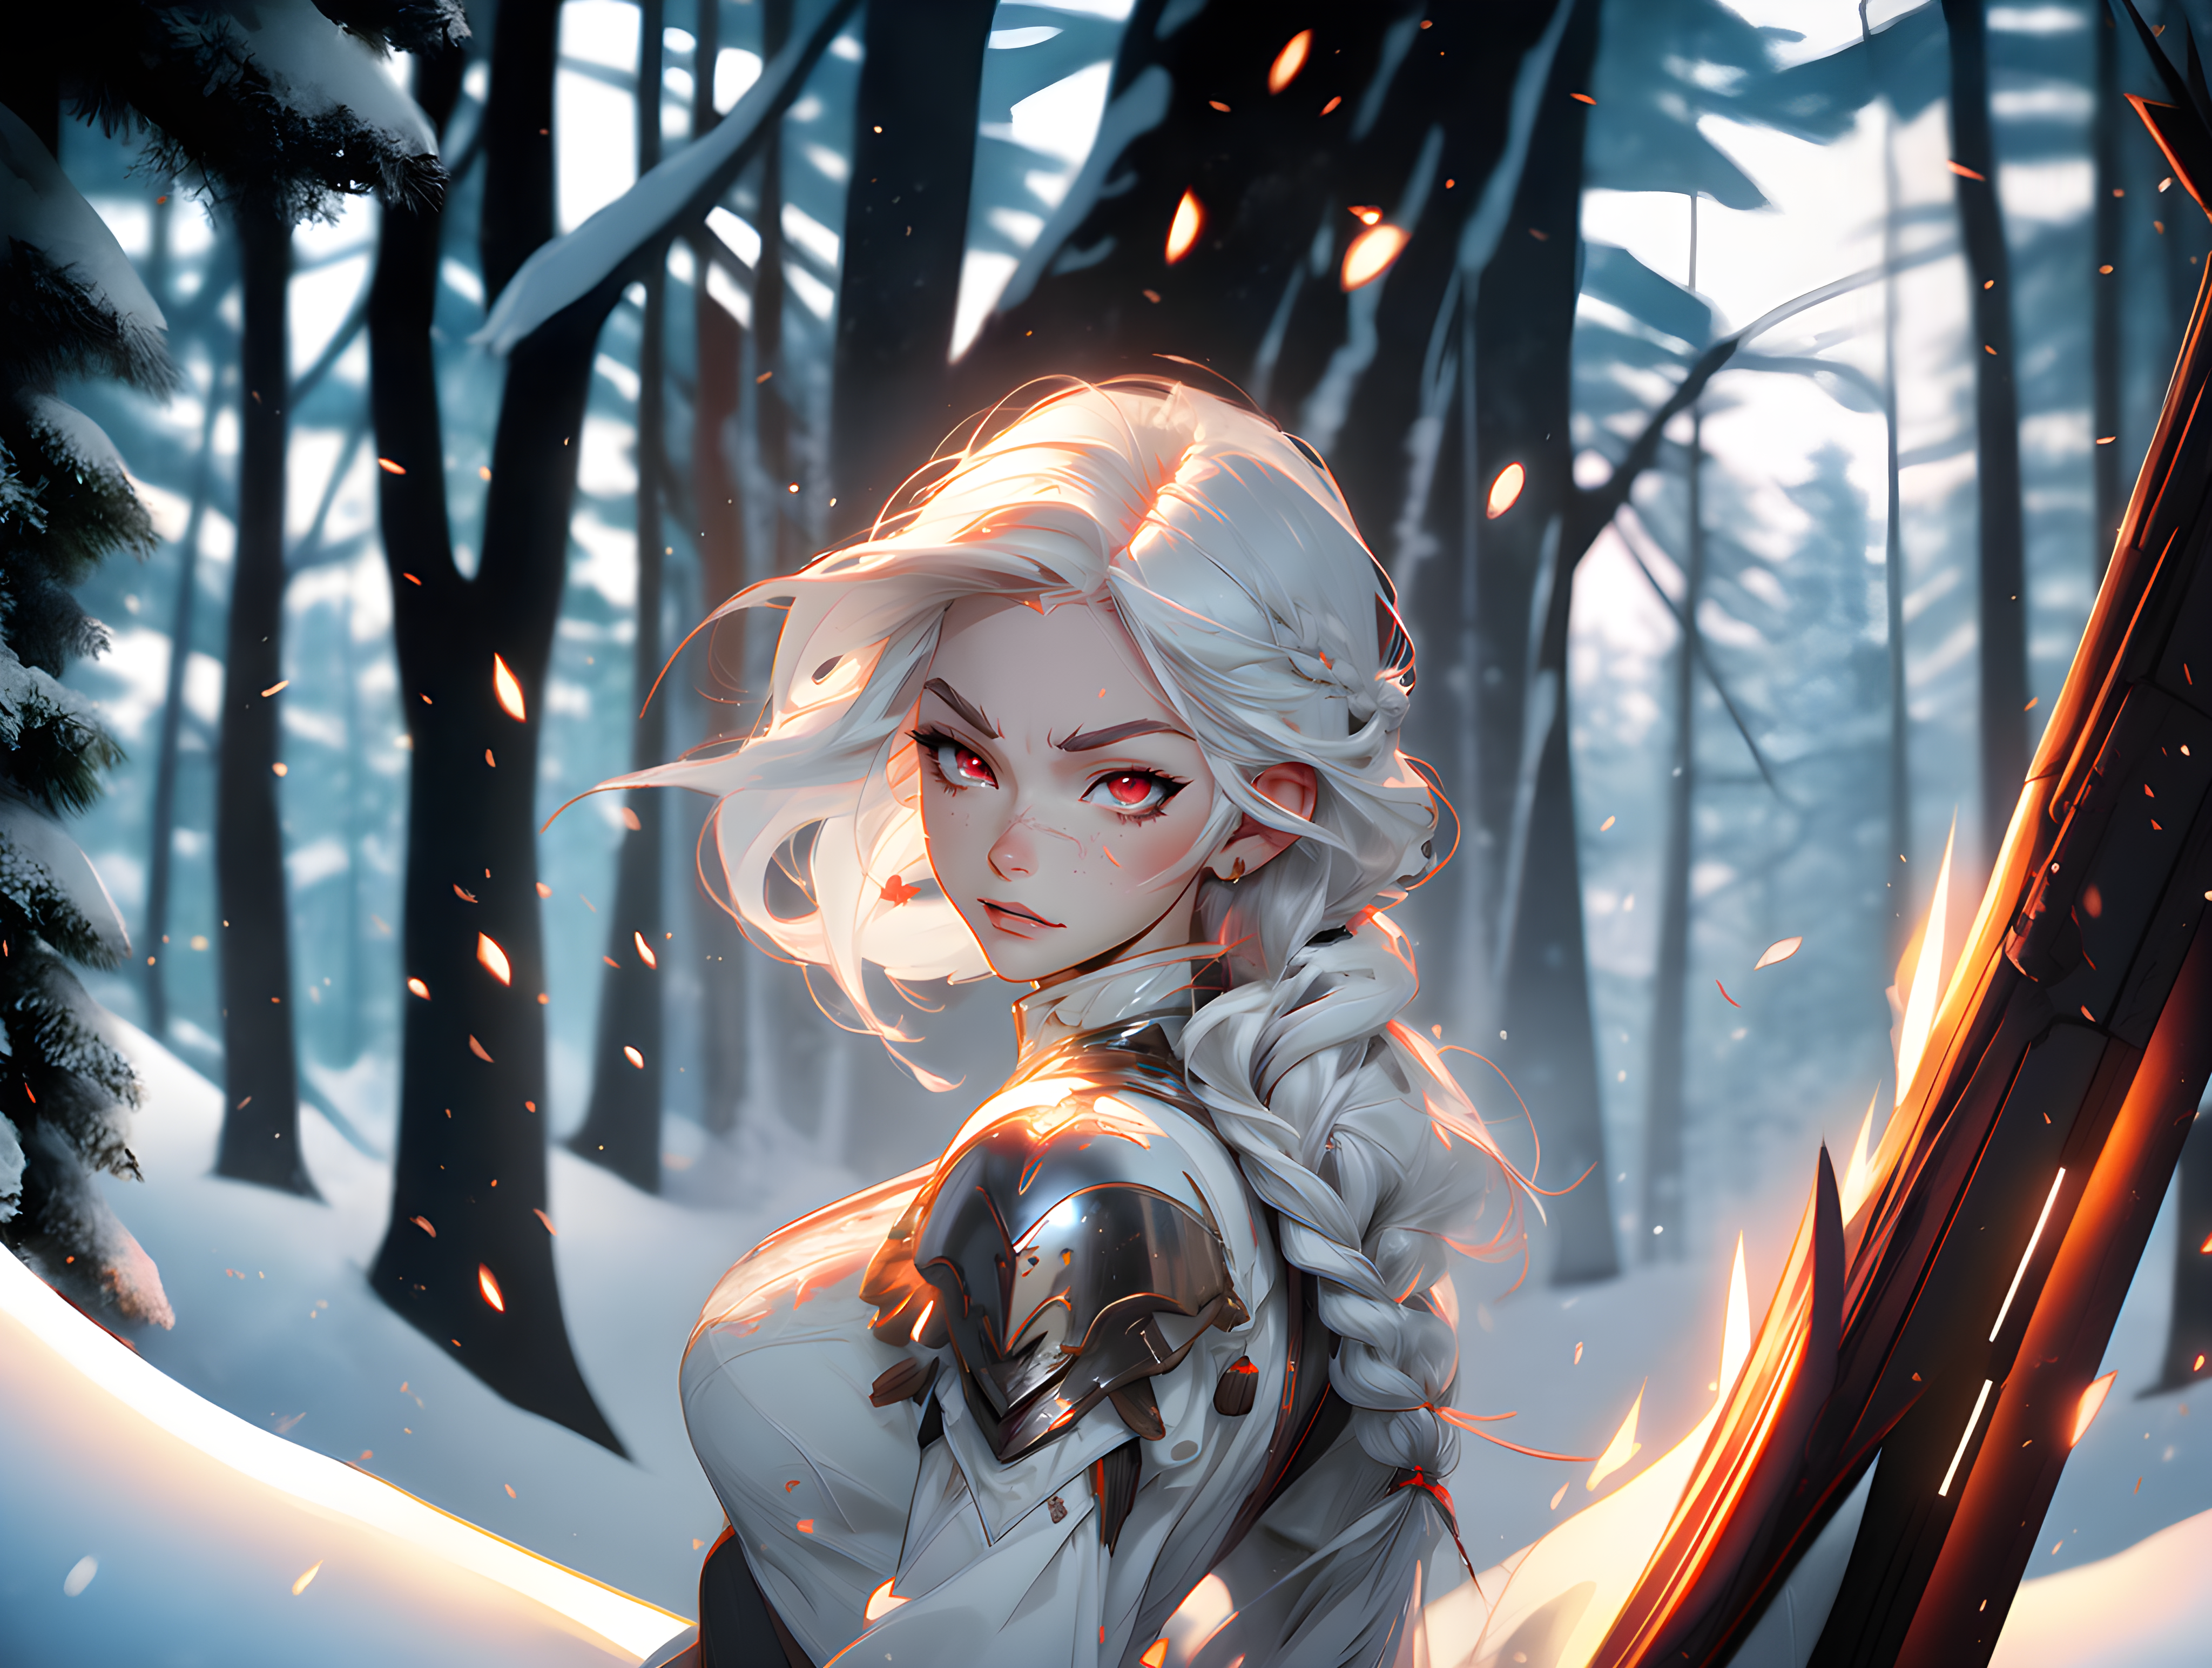 Girl In Armor Siri Red Eyes White Hair The Witcher 3 Wild Hunt The Witcher Snow Cirilla Fiona Elen R 4096x3088